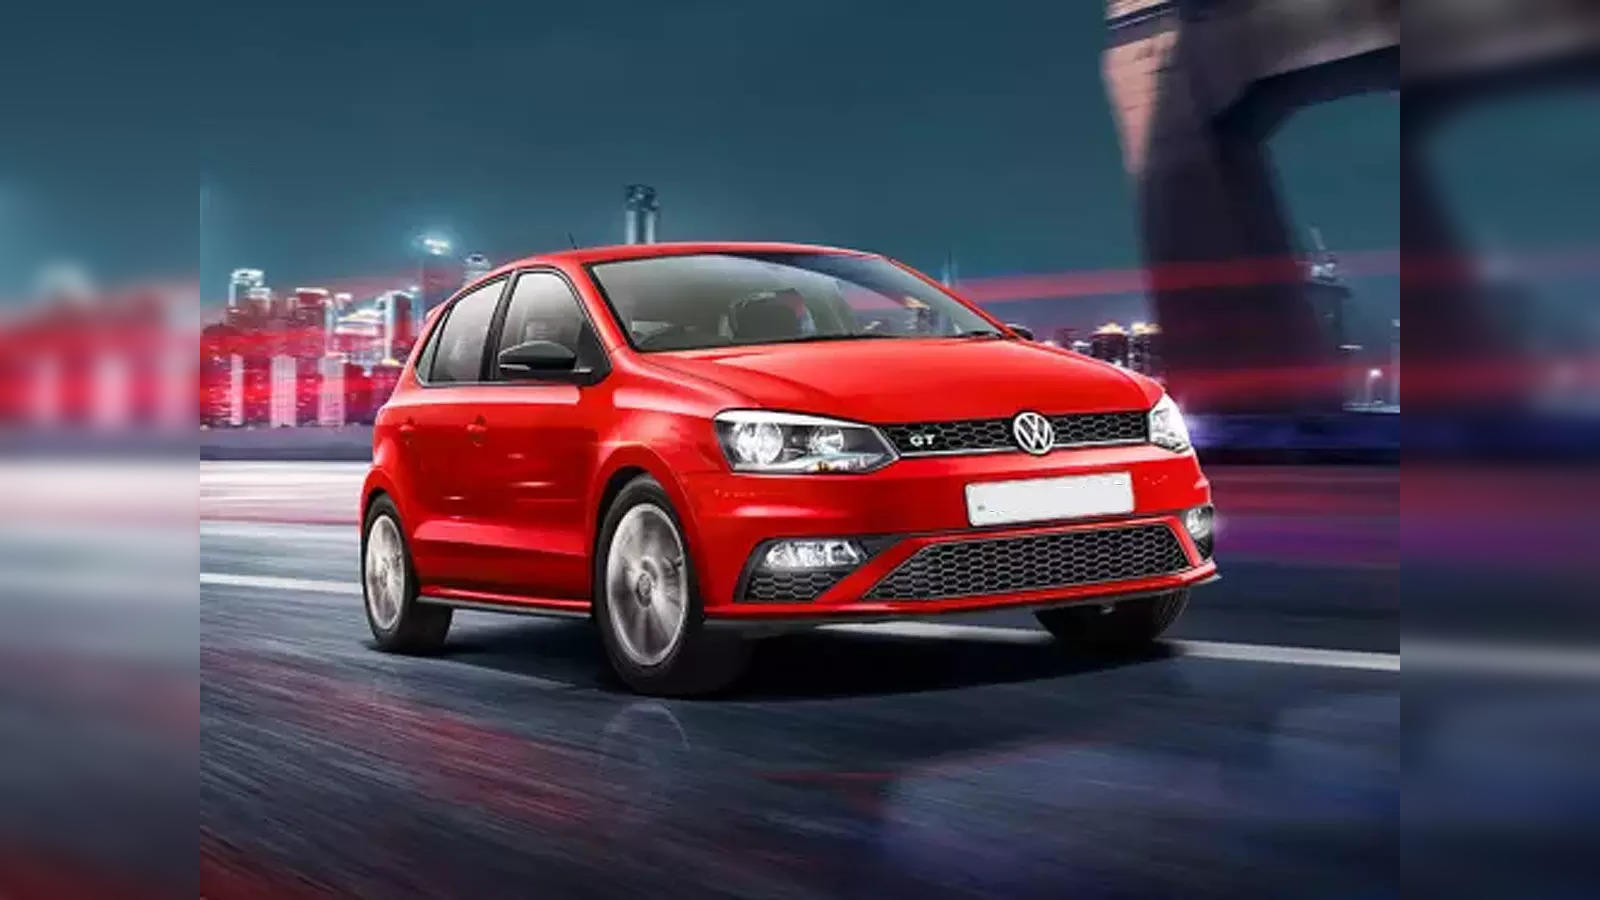 Polo GTI: The hottest hatch around - India Today